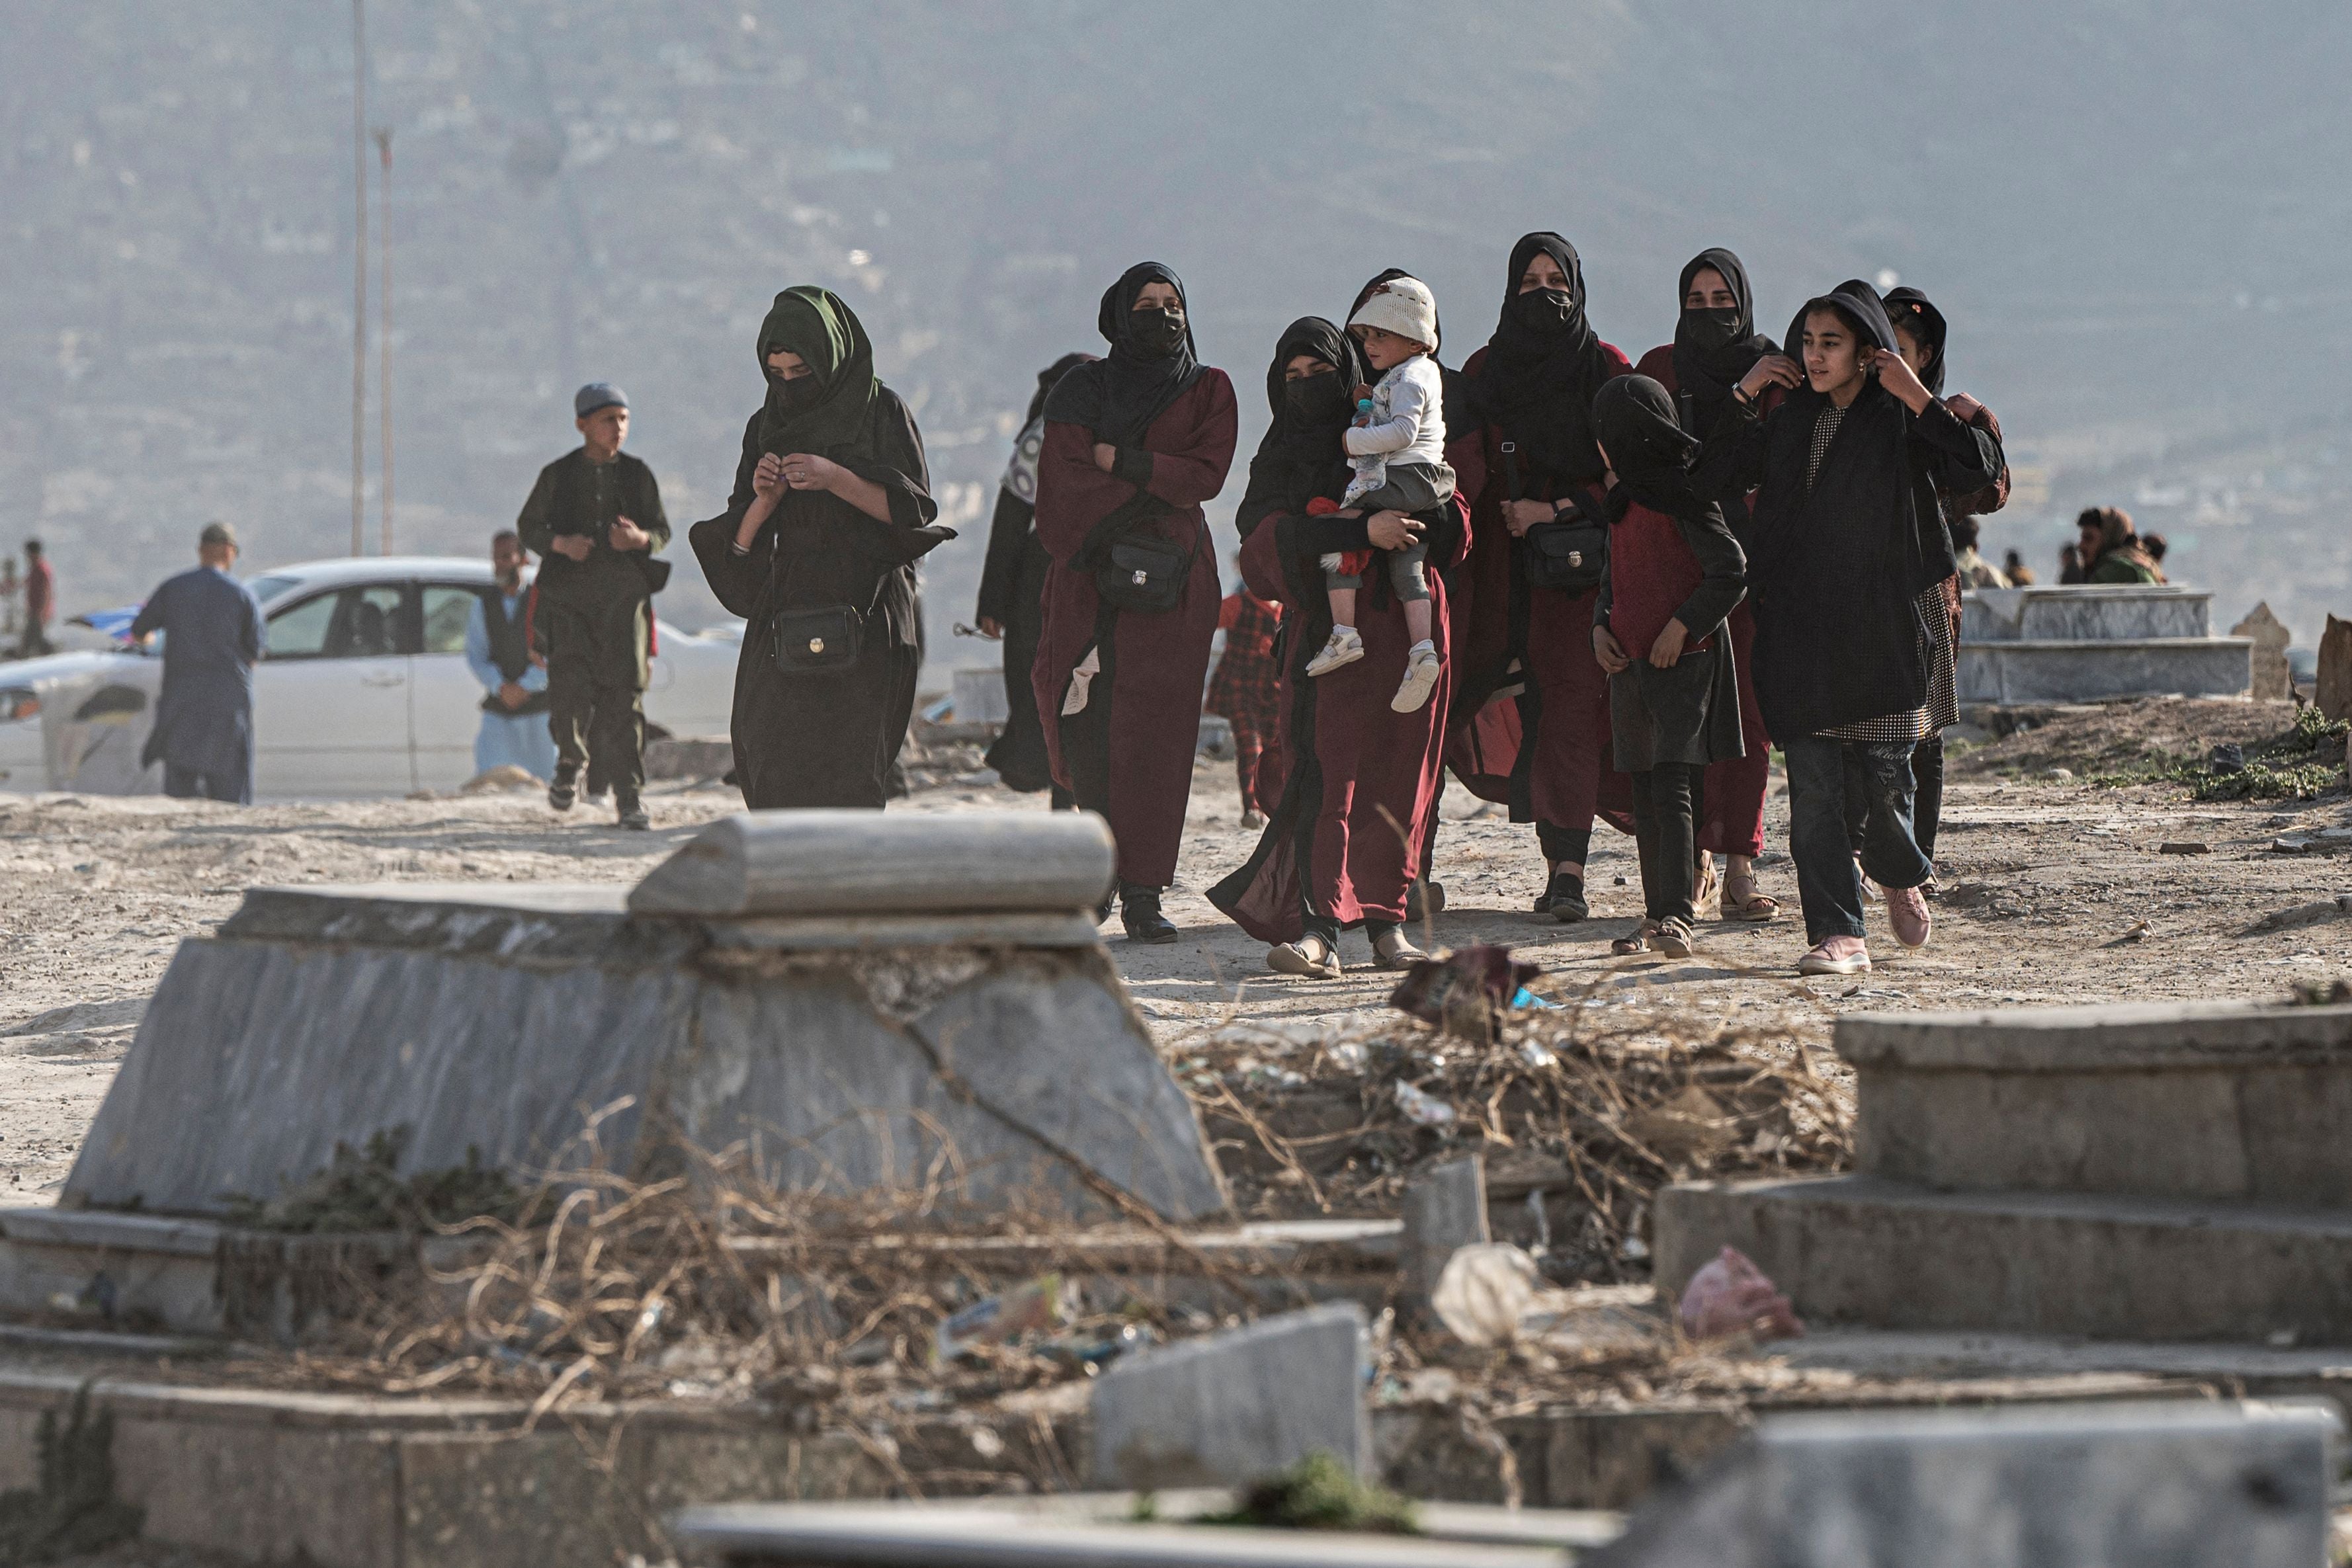 Afghan women with children walk at a graveyard at a hilltop in Kabul, Afghanistan